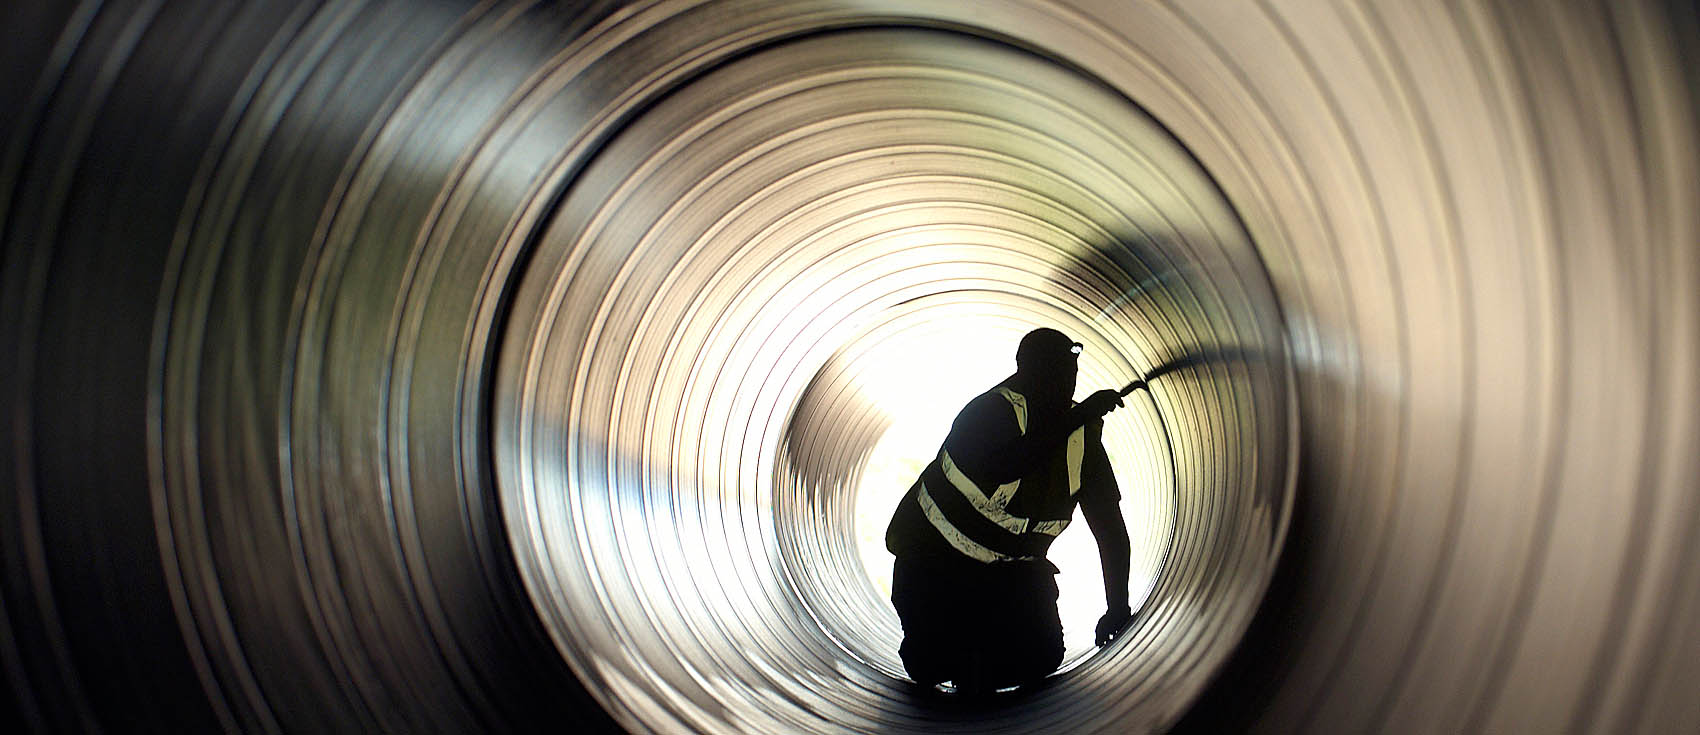 Industrial Photography: Water pipeline installation. Utilities company. Liverpool - Manchester